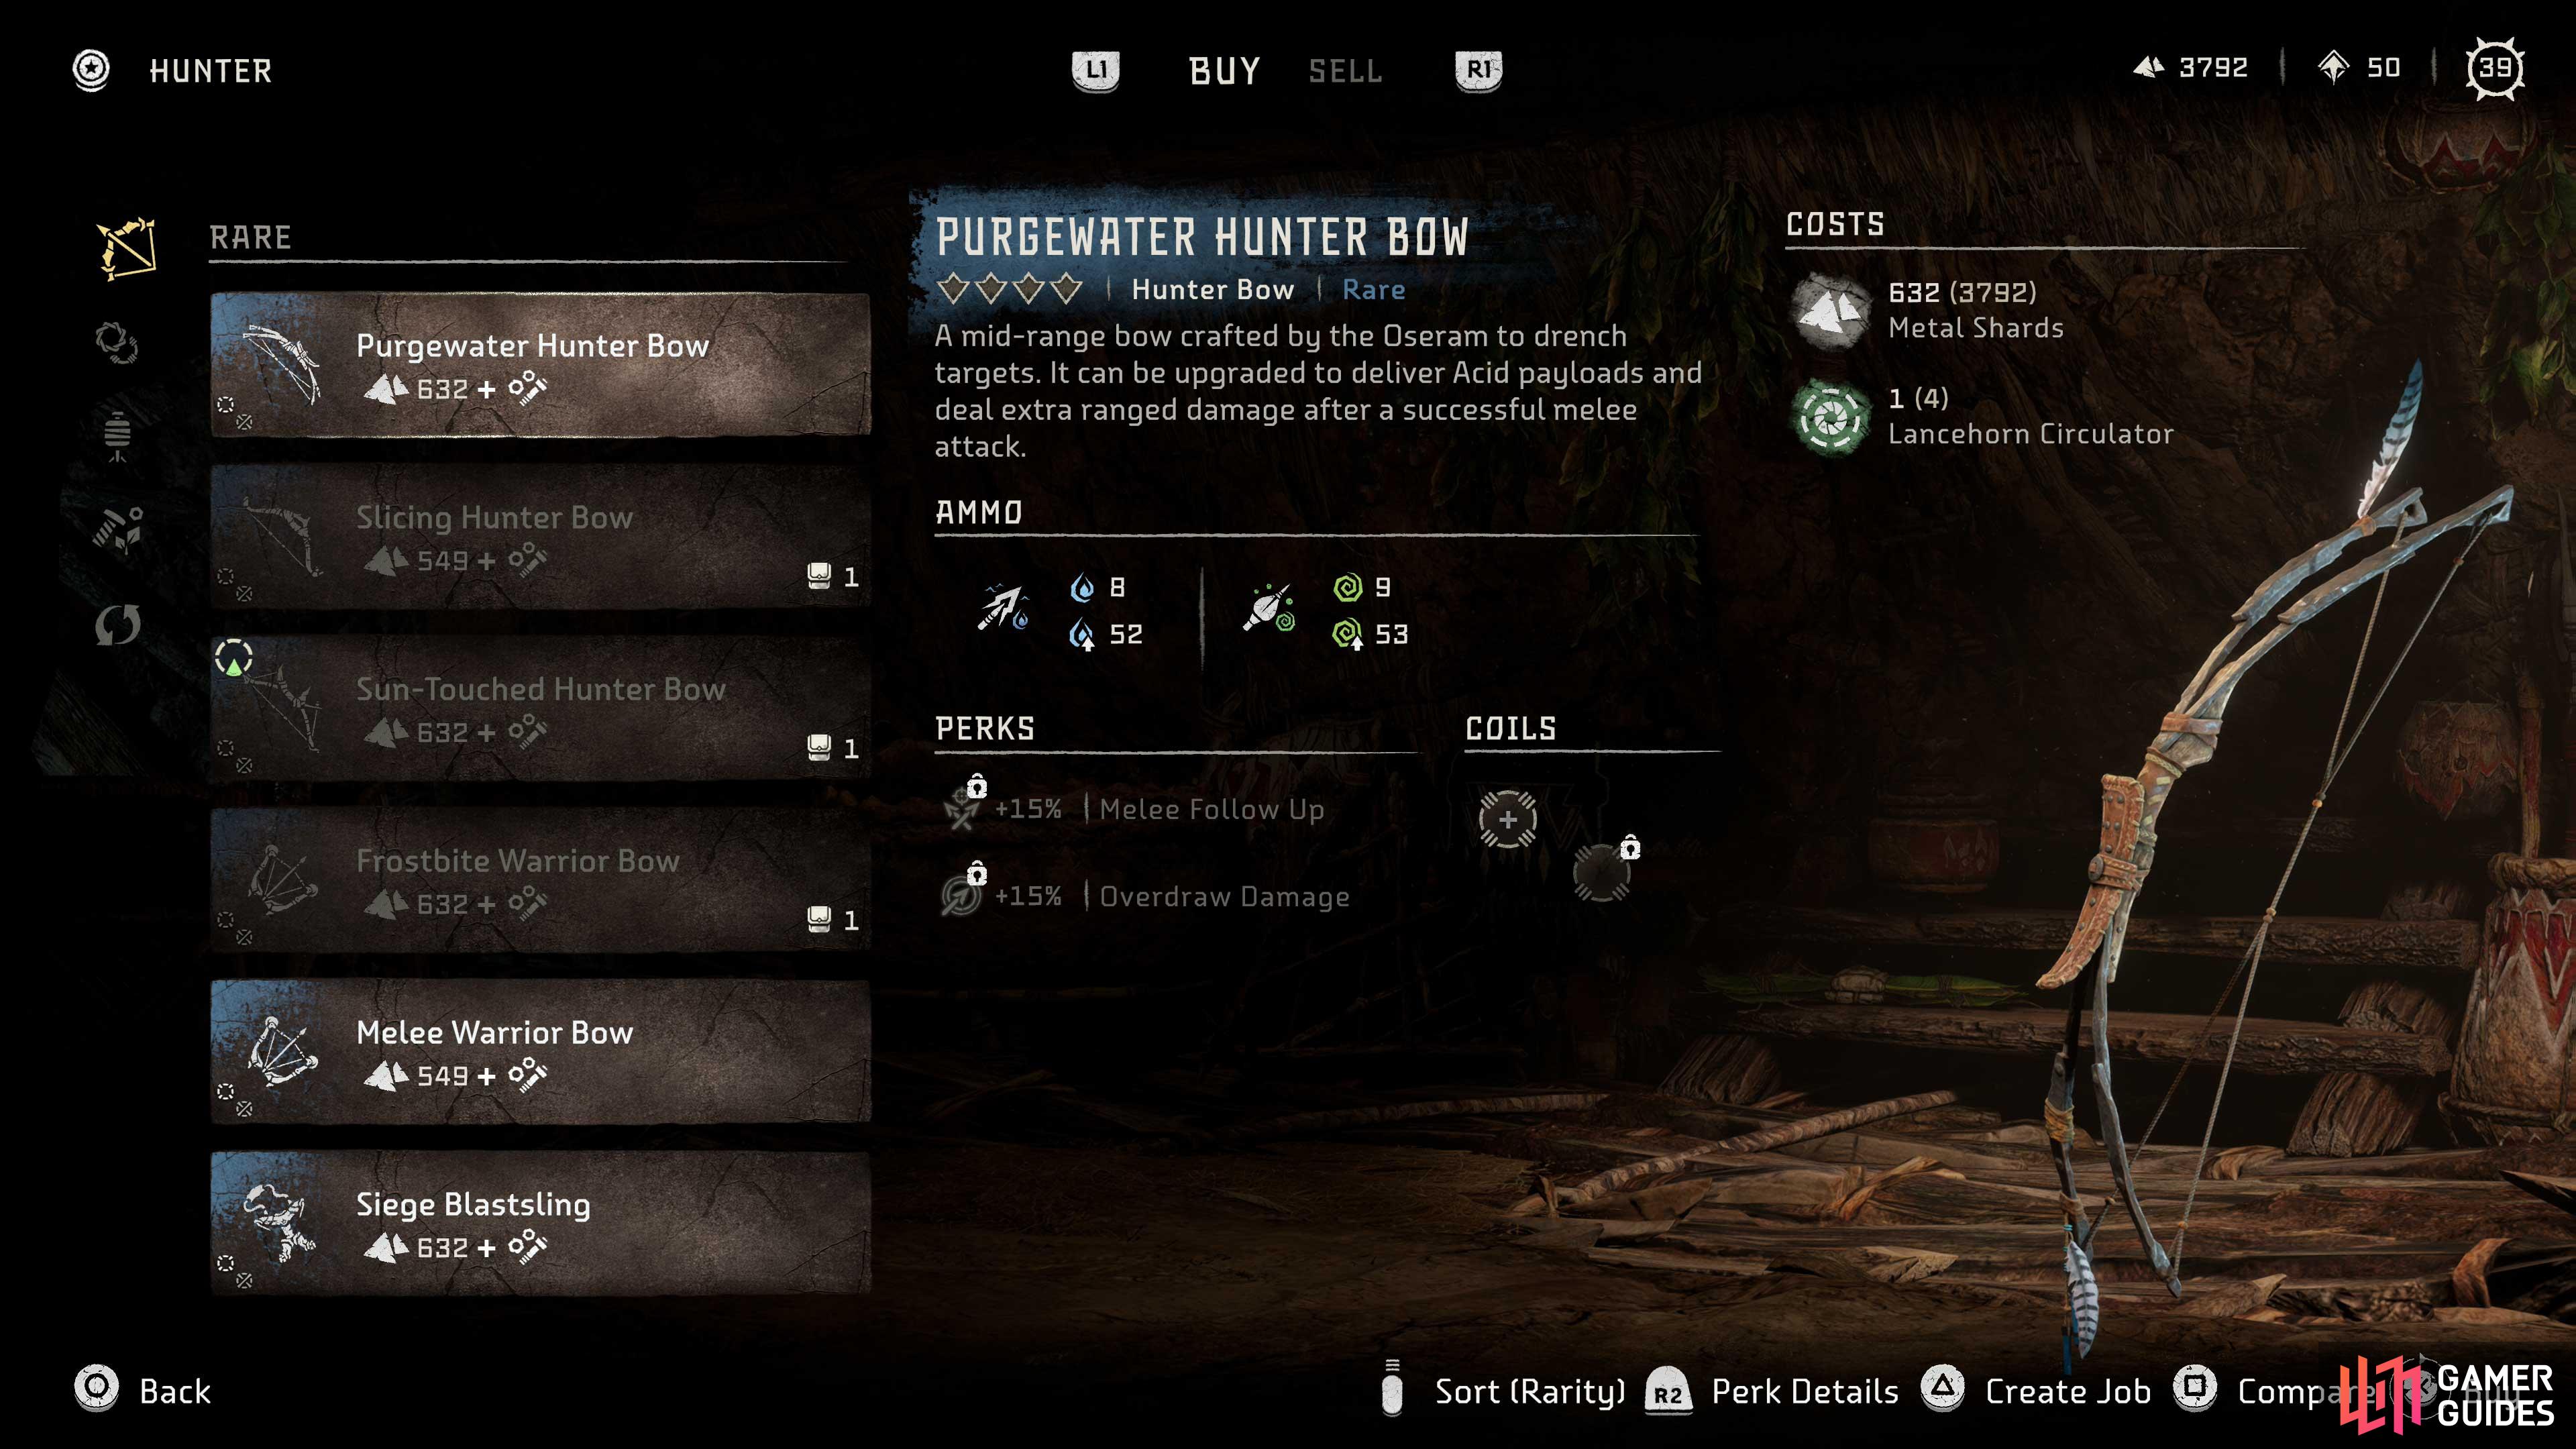 You can purchase the Purgewater Hunter Bow from the Hunter in Scalding Spear.